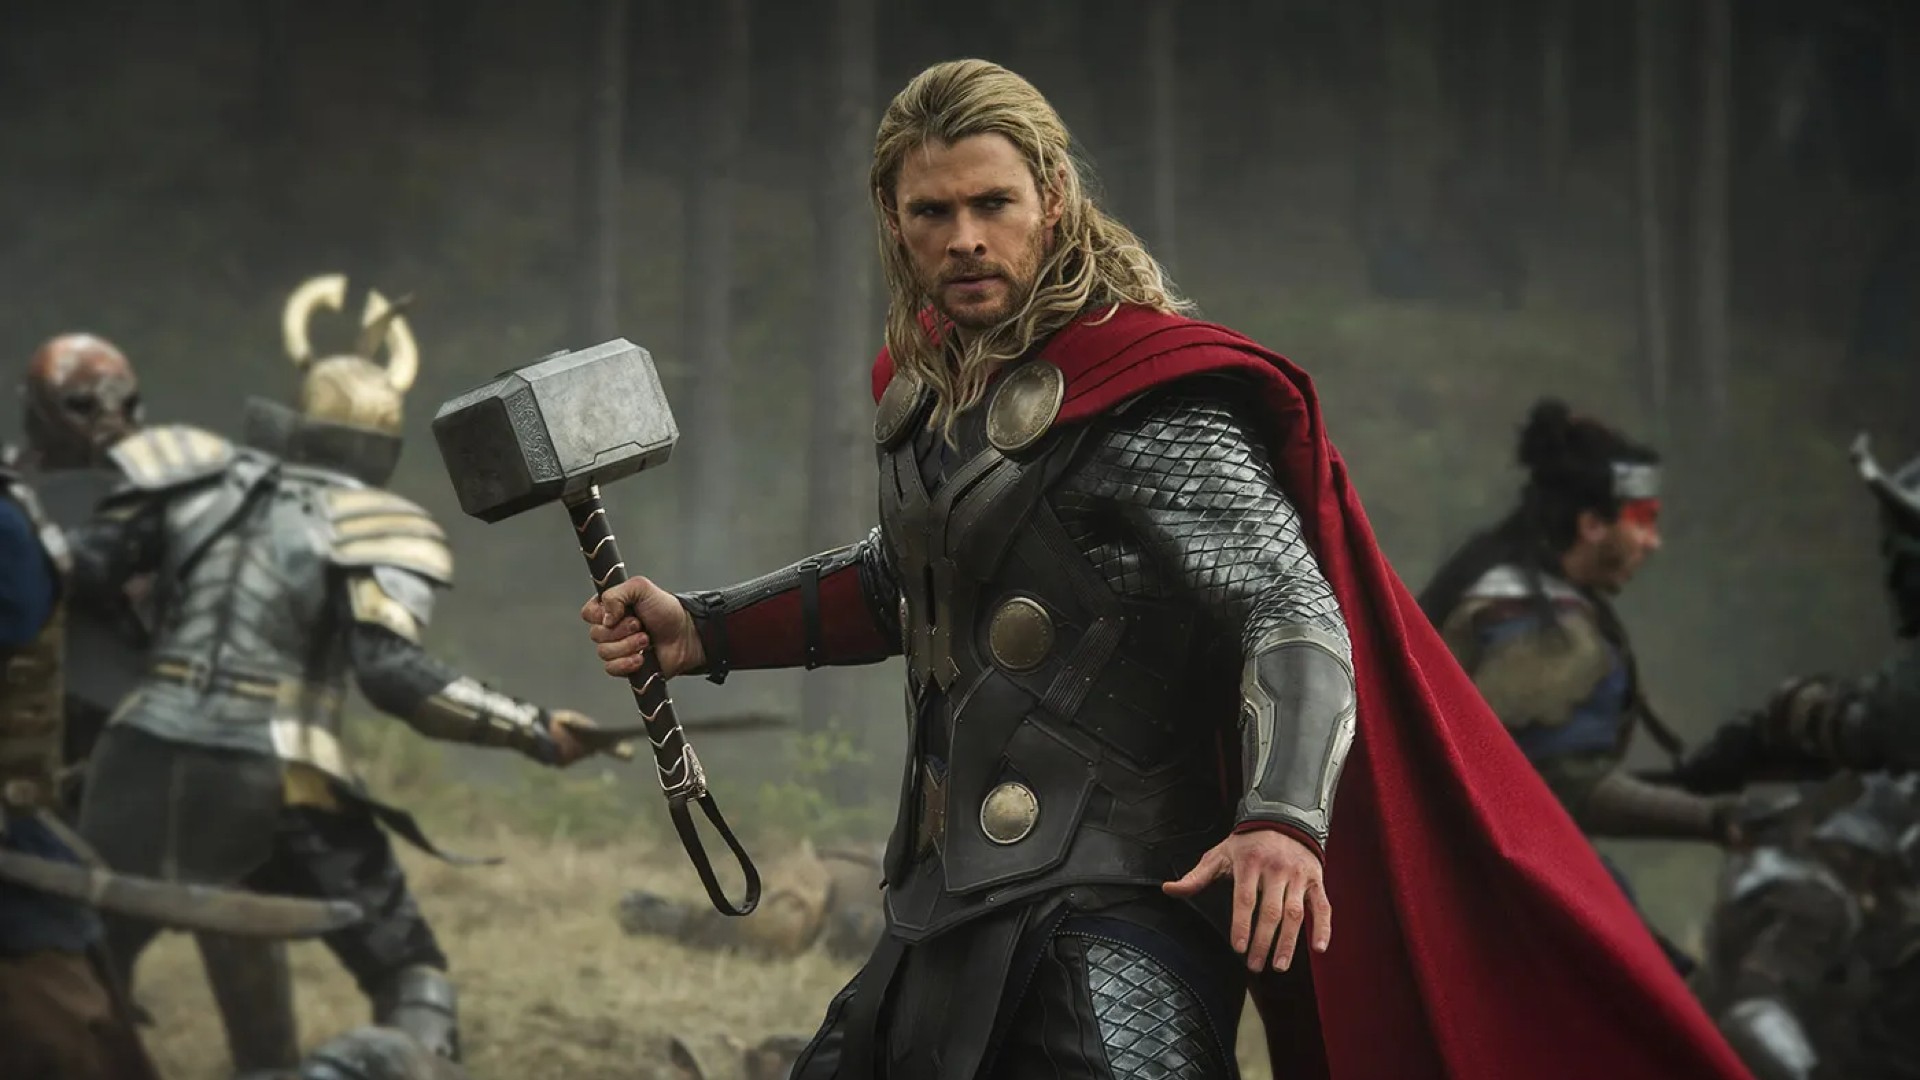 Thor: Love and Thunder Opens Strong, But Mixed Reviews Could Hurt Totals